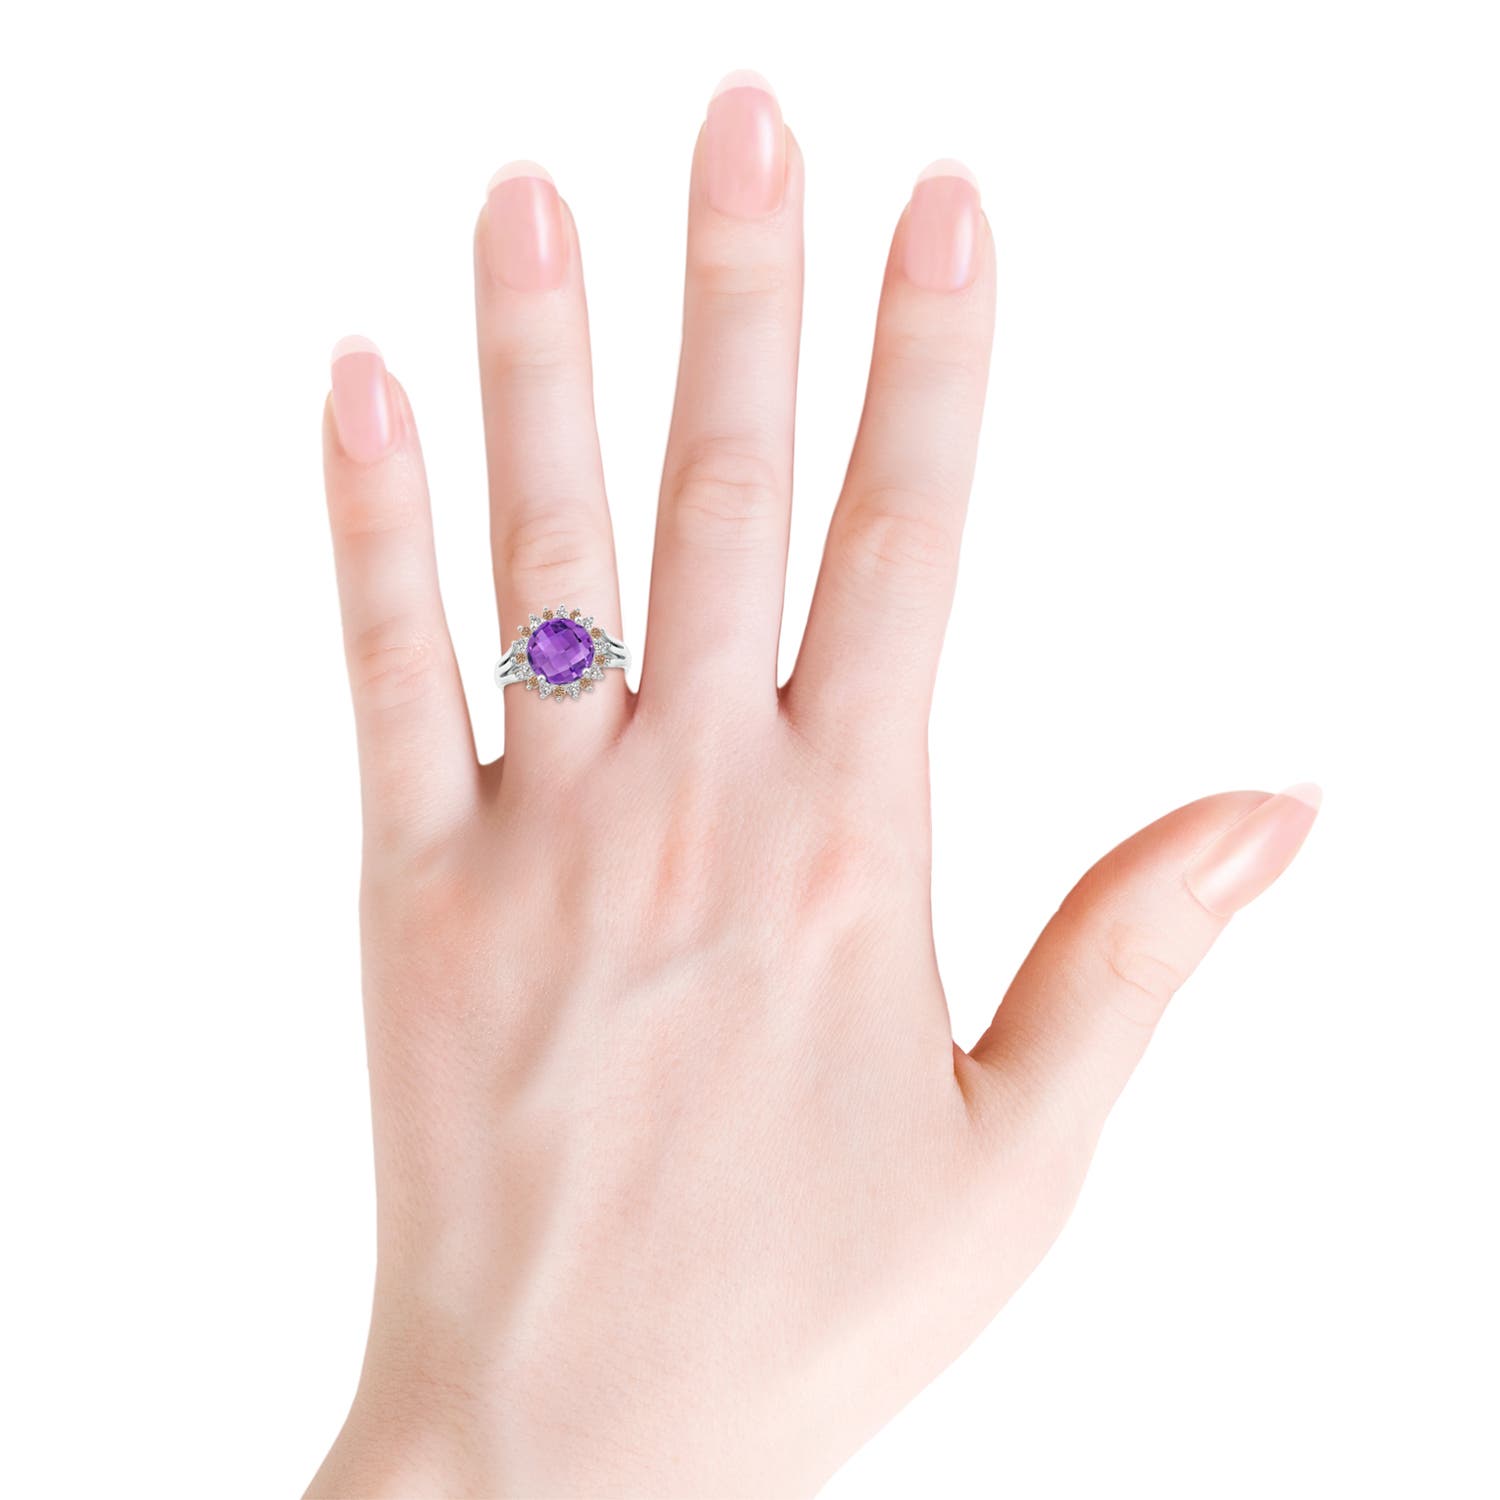 AA - Amethyst / 3 CT / 14 KT White Gold